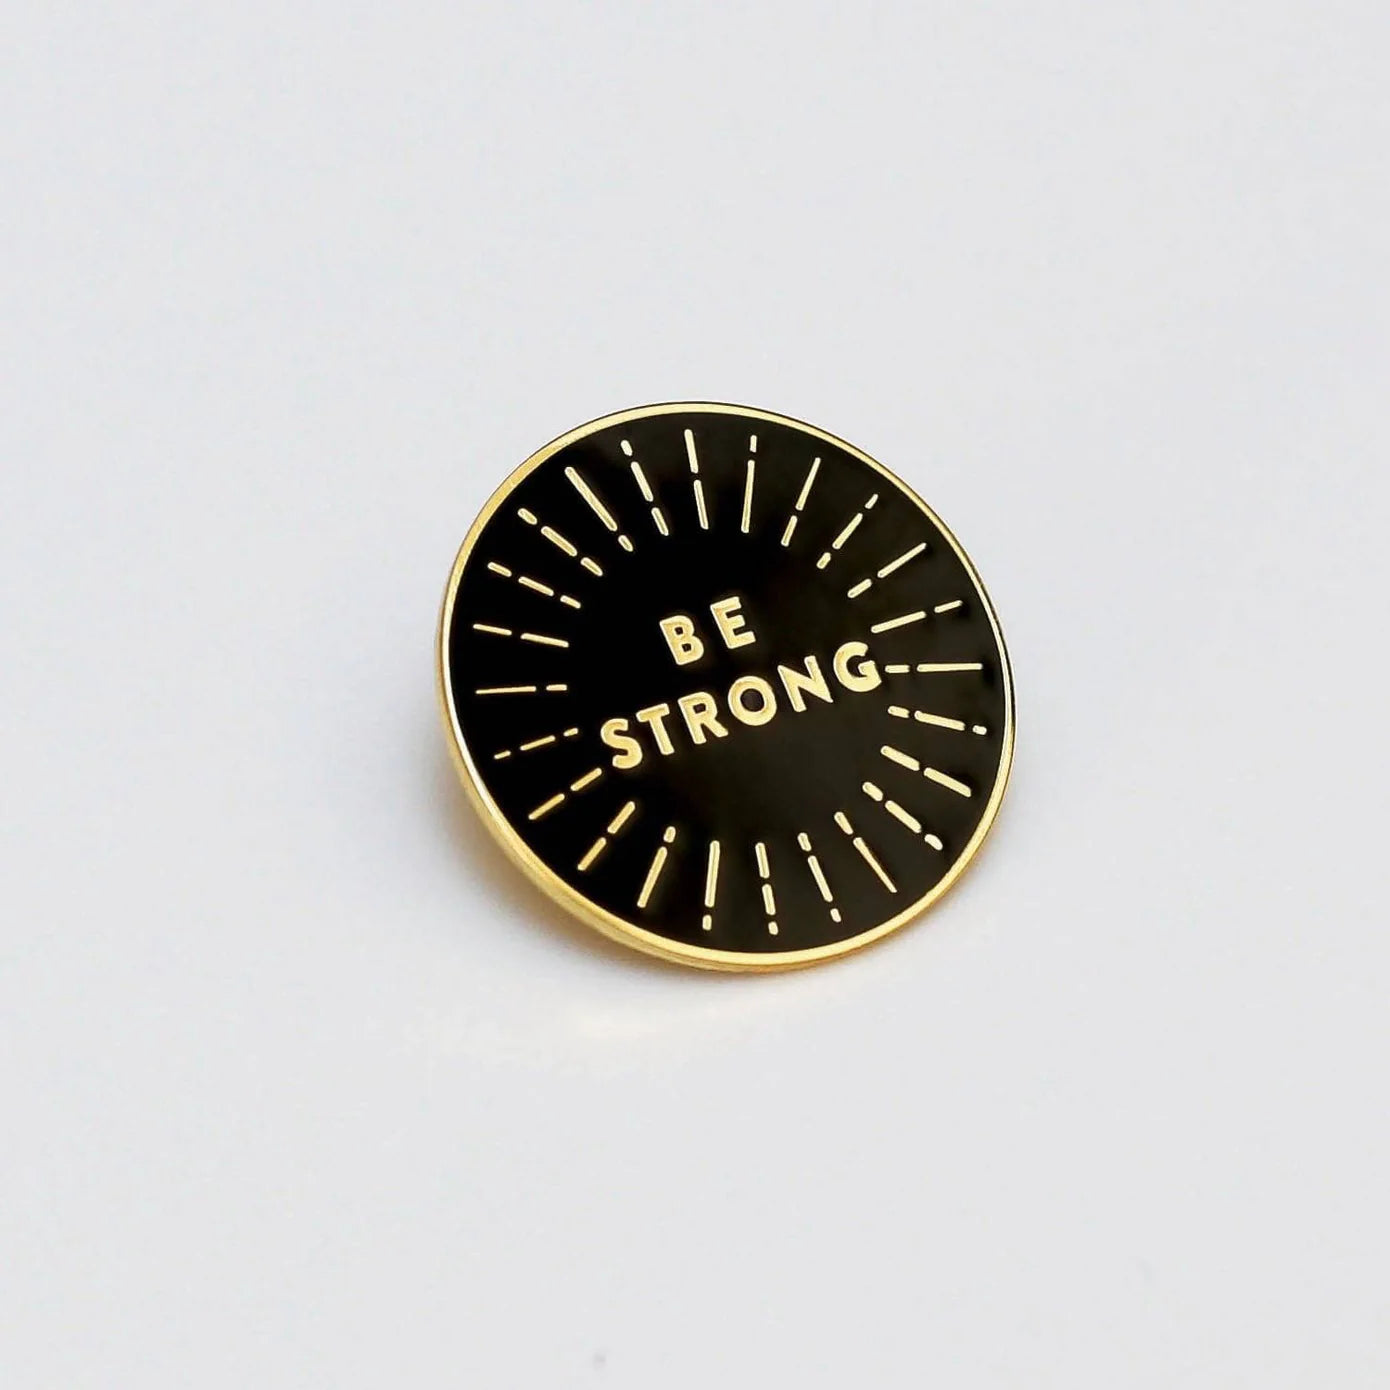 Be Strong pin